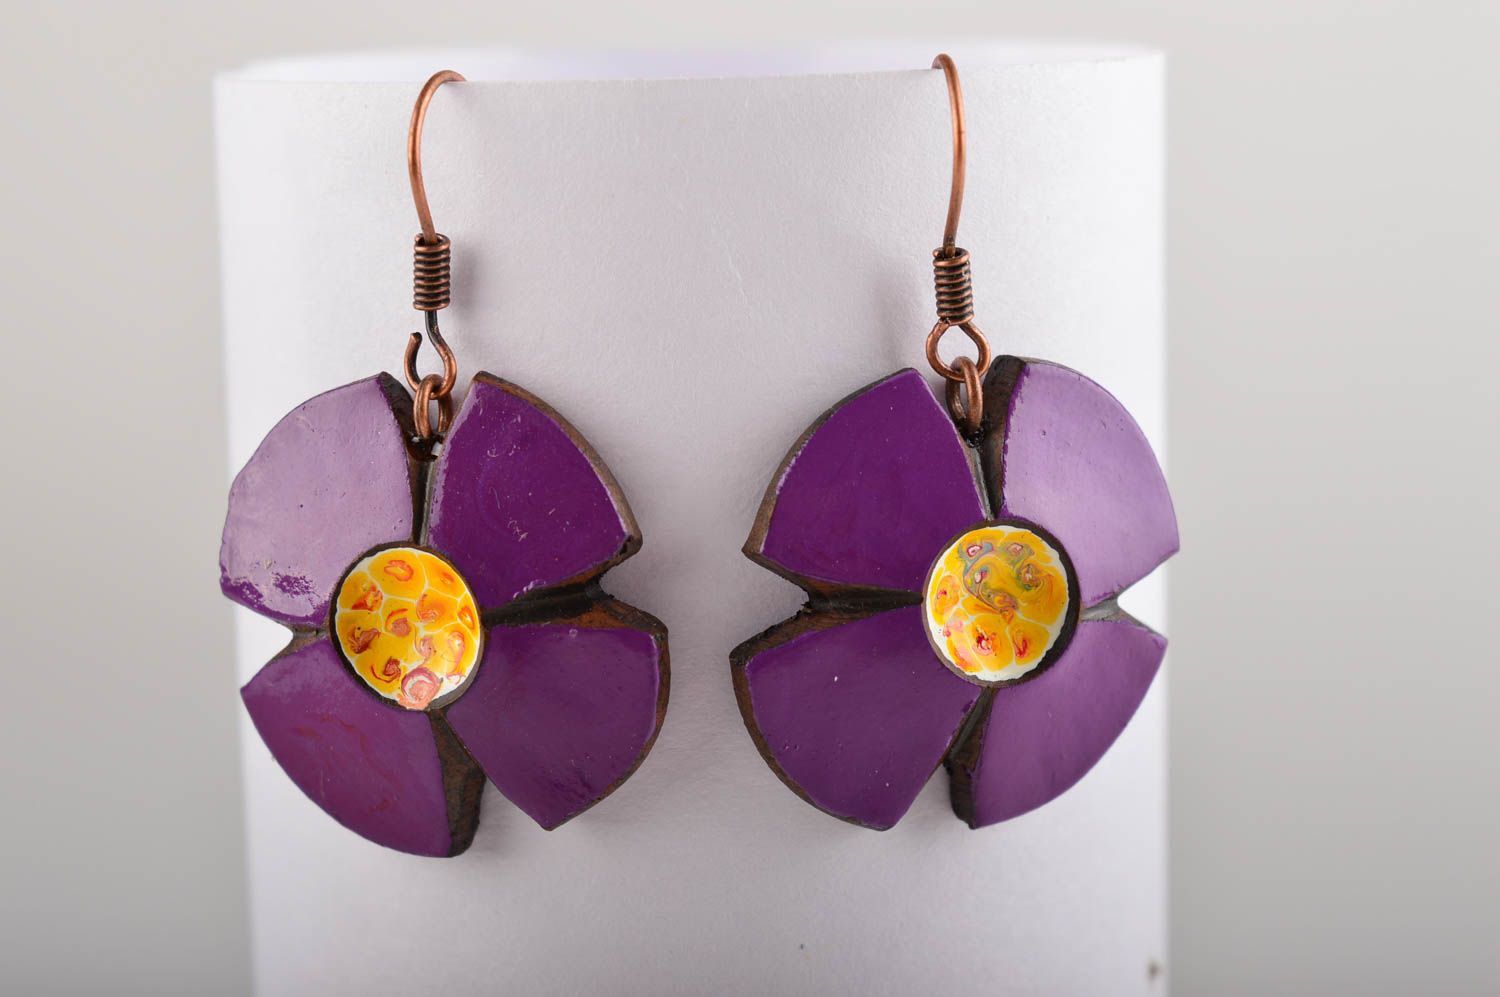 Handmade earrings ceramic jewelry fashion accessories for women unique gifts photo 1